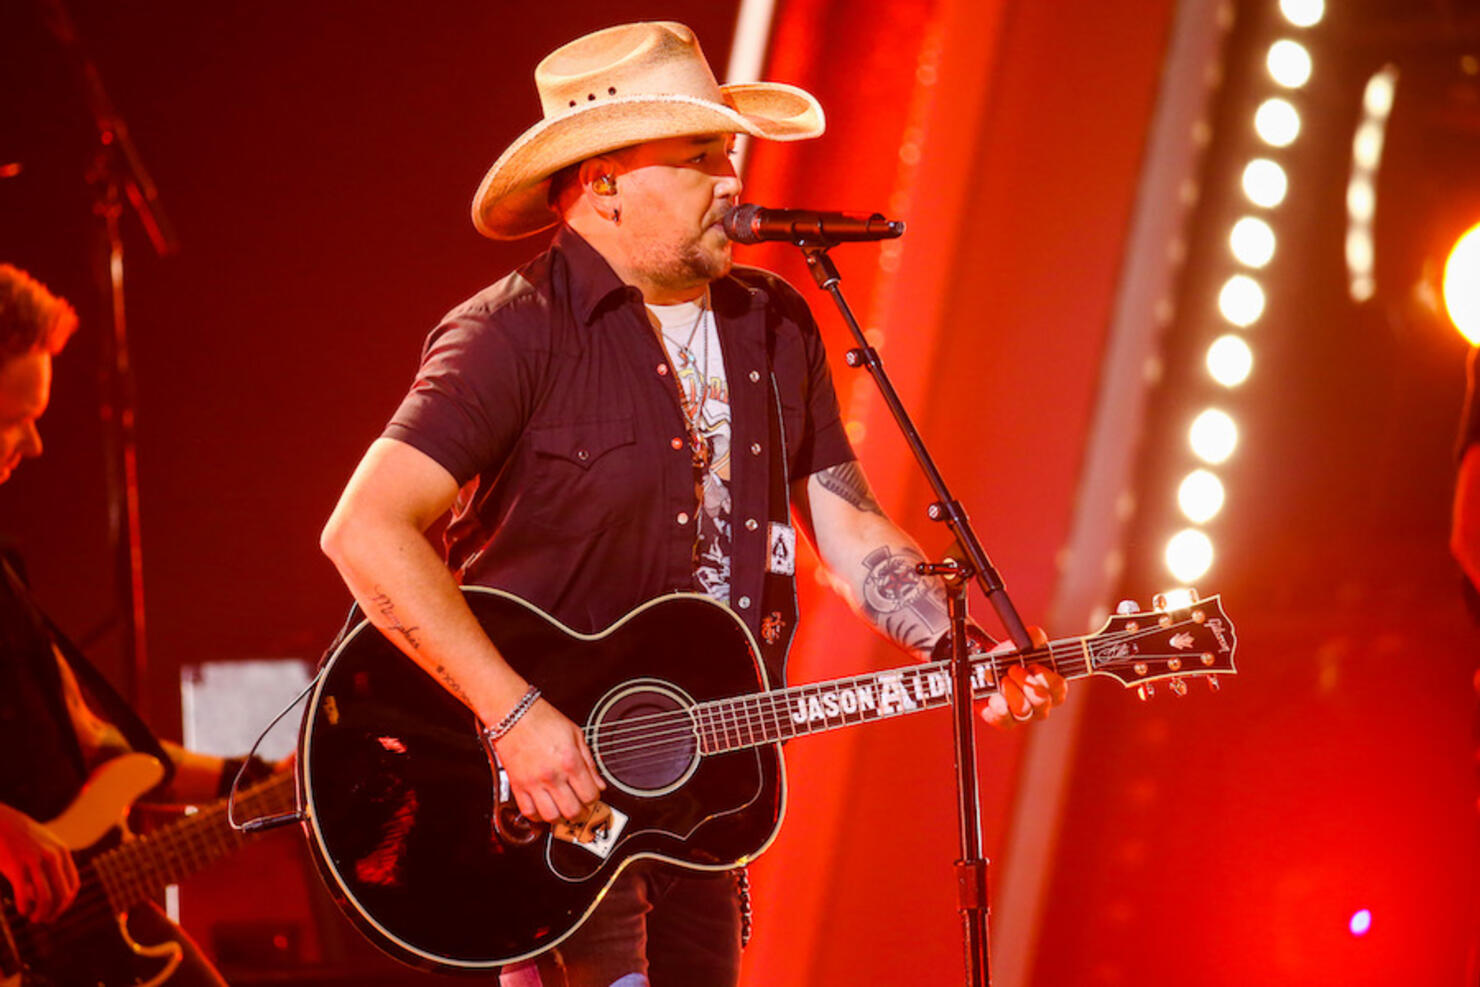 Jason Aldean & More Kick Off CMA Awards With Charlie Daniels Tribute